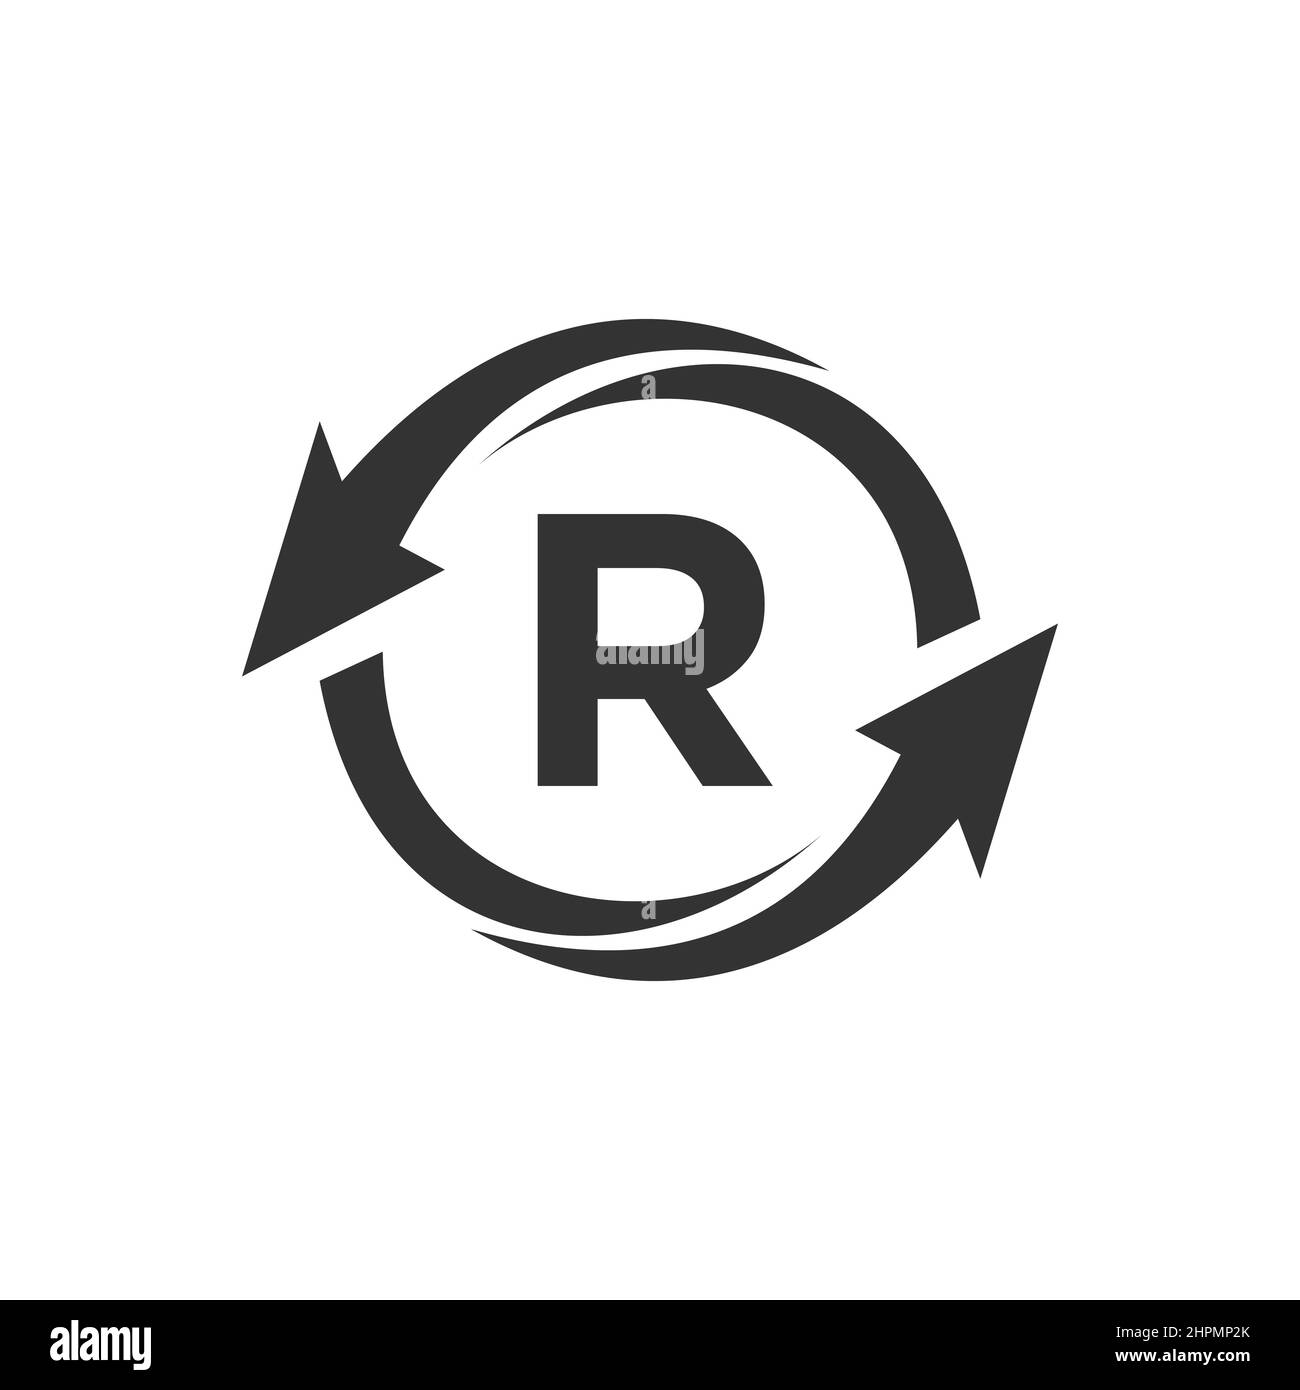 Finance Logo With R Letter Concept. Marketing And Financial Business Logo. Letter R Financial Logo Template With Marketing Growth Arrow Stock Vector